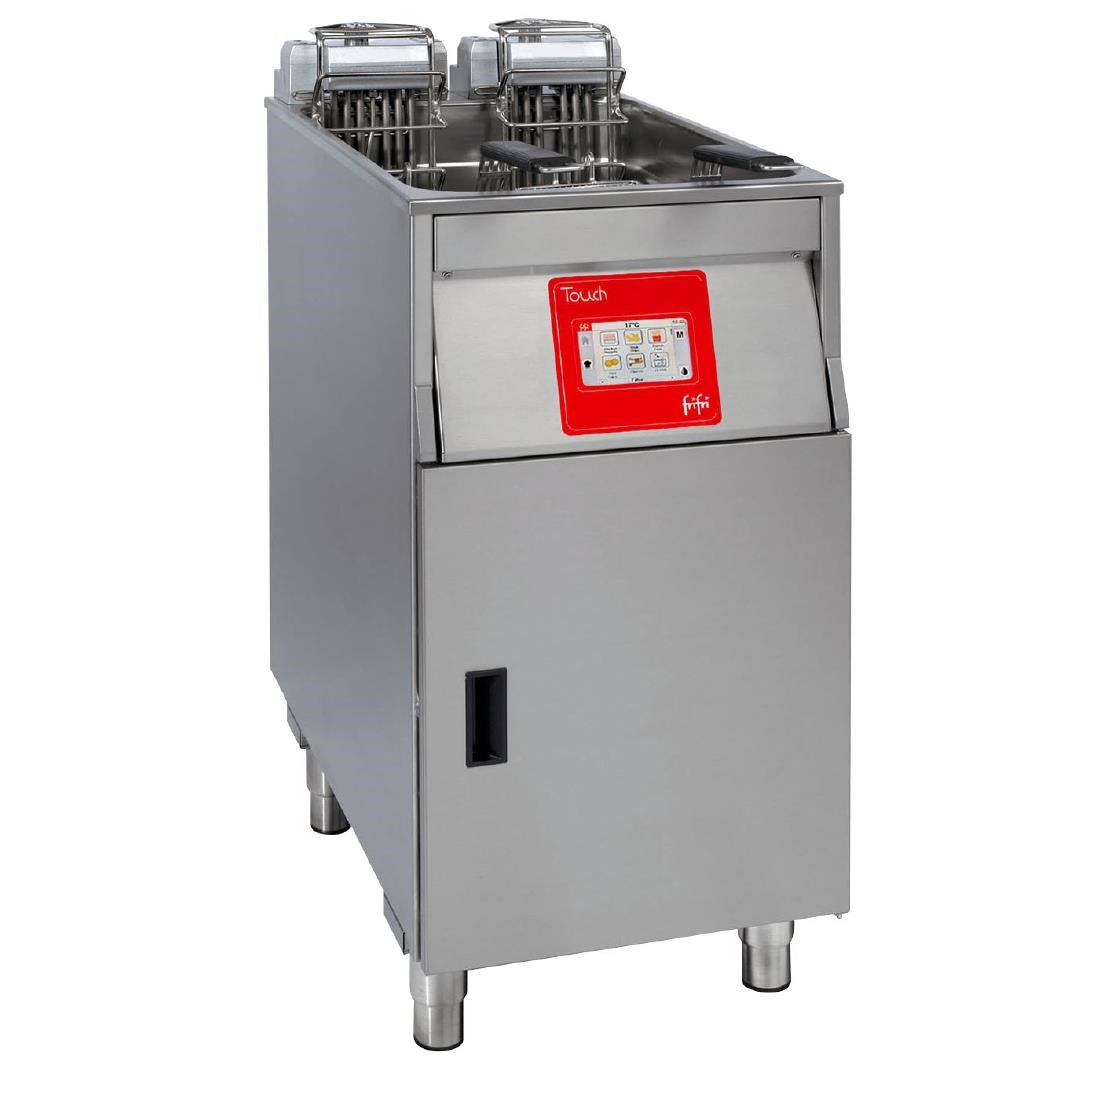 HS010-3PH FriFri Touch 412 Electric Free-Standing Single Tank Fryer 2 Baskets 22kW - Three Phase